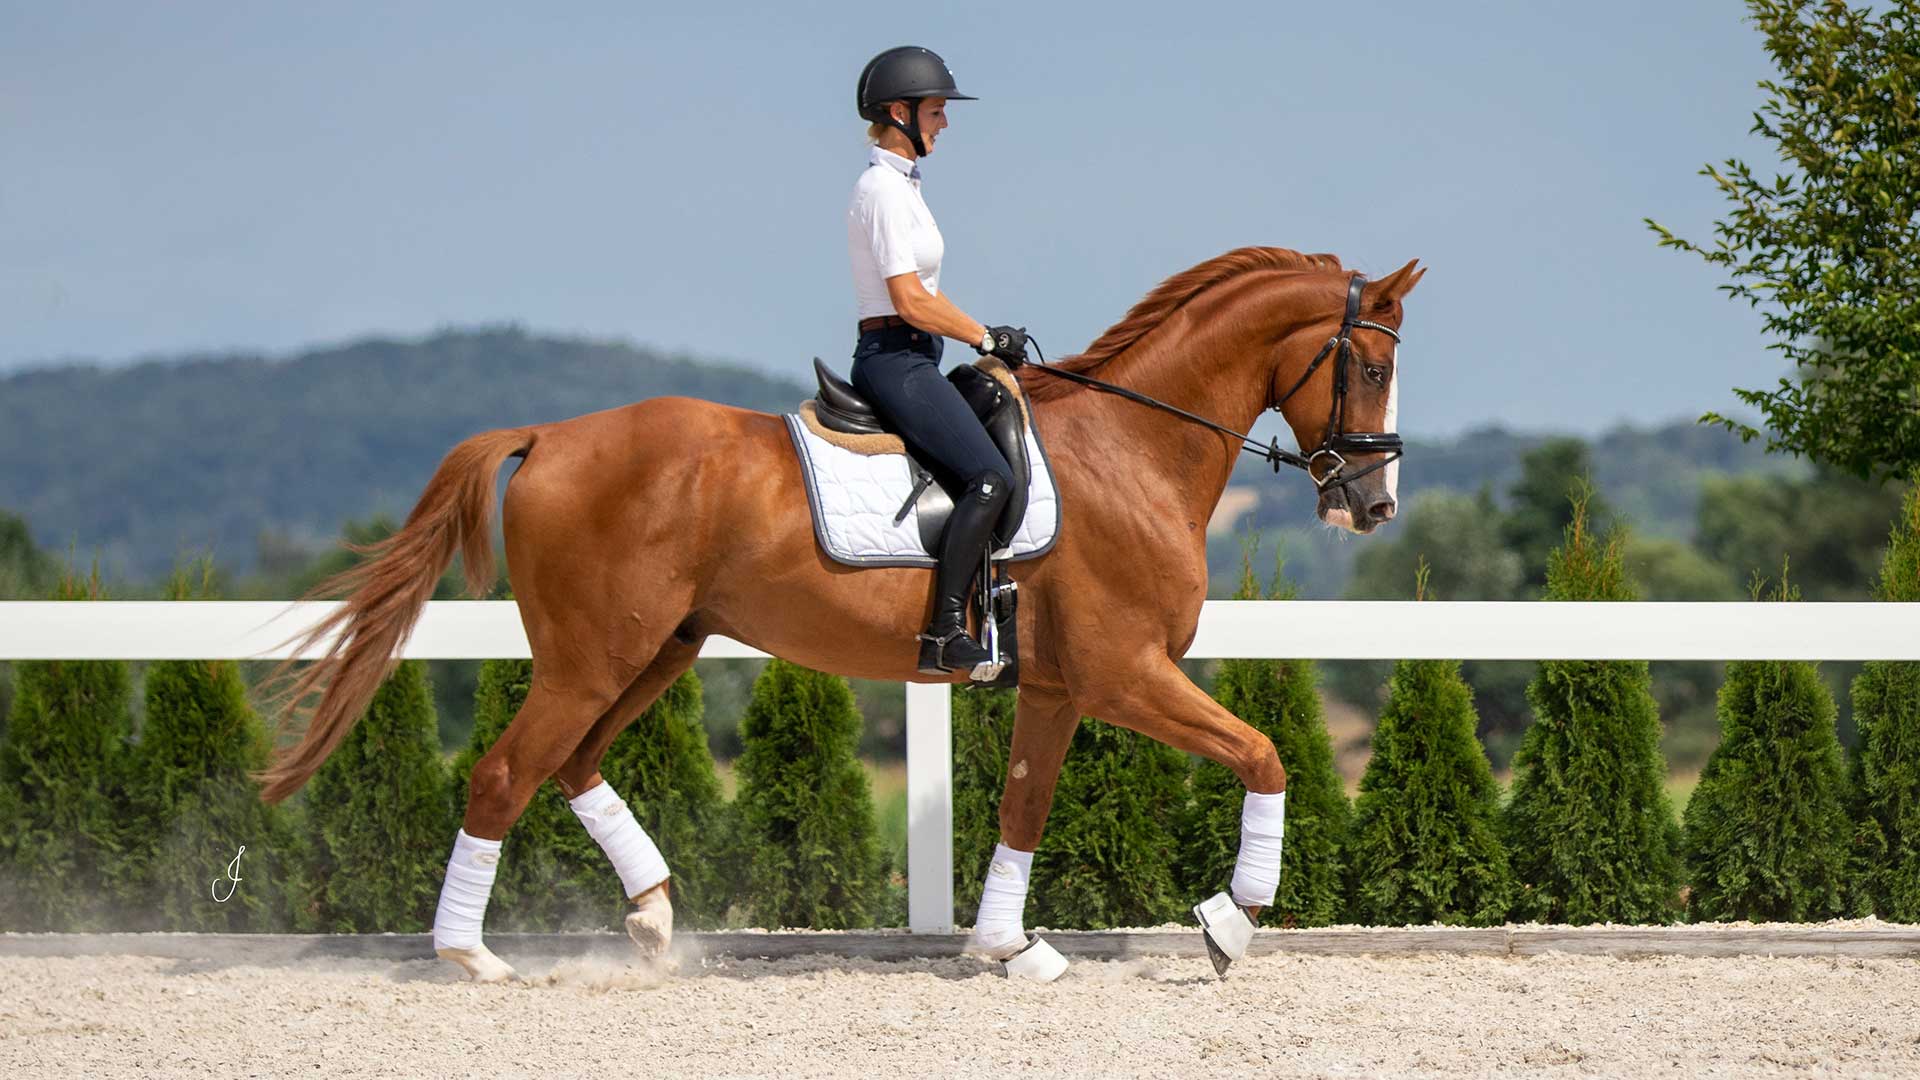 TTE® RIDING ARENA: ideal riding characteristics for dressage and show jumping.